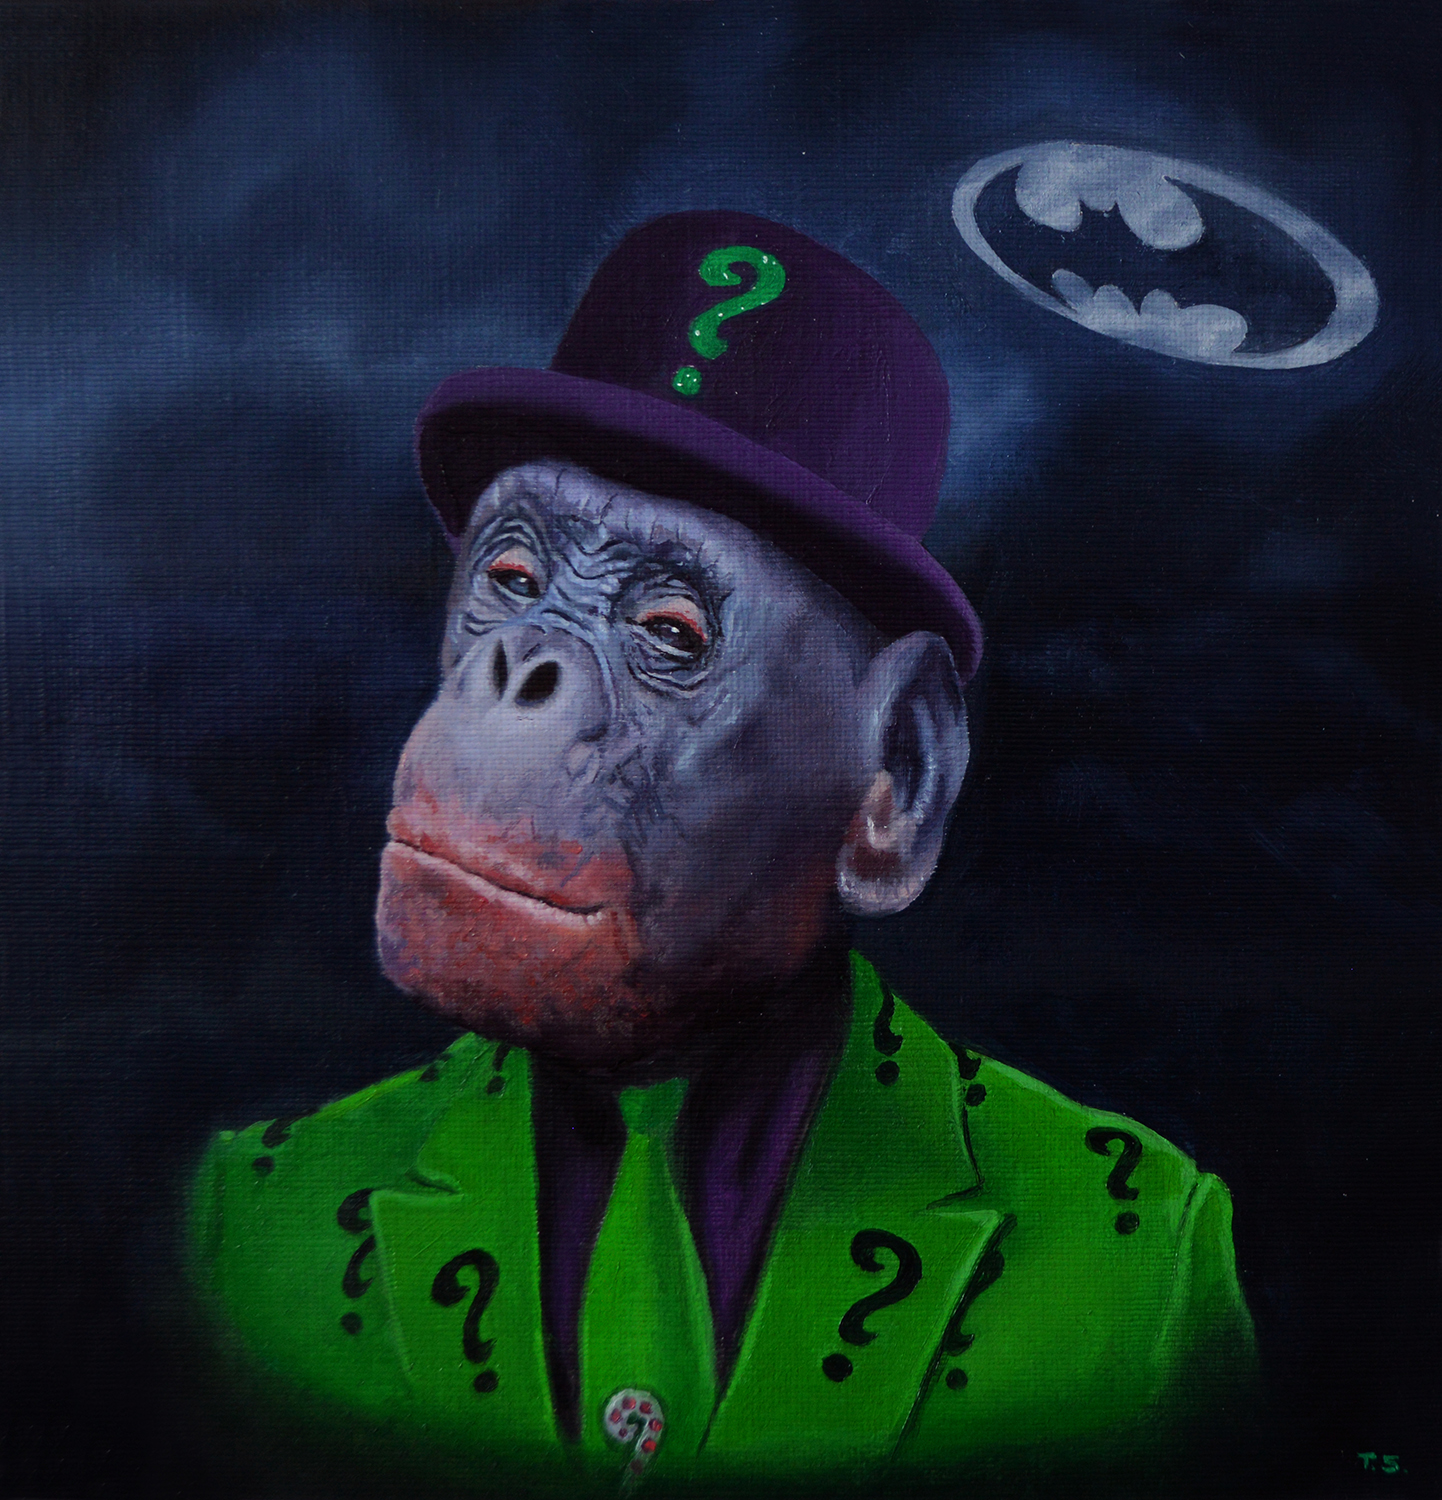 A monkey dresses like the Riddler with a Batman signal in the sky - Tony South - Riddle Me This